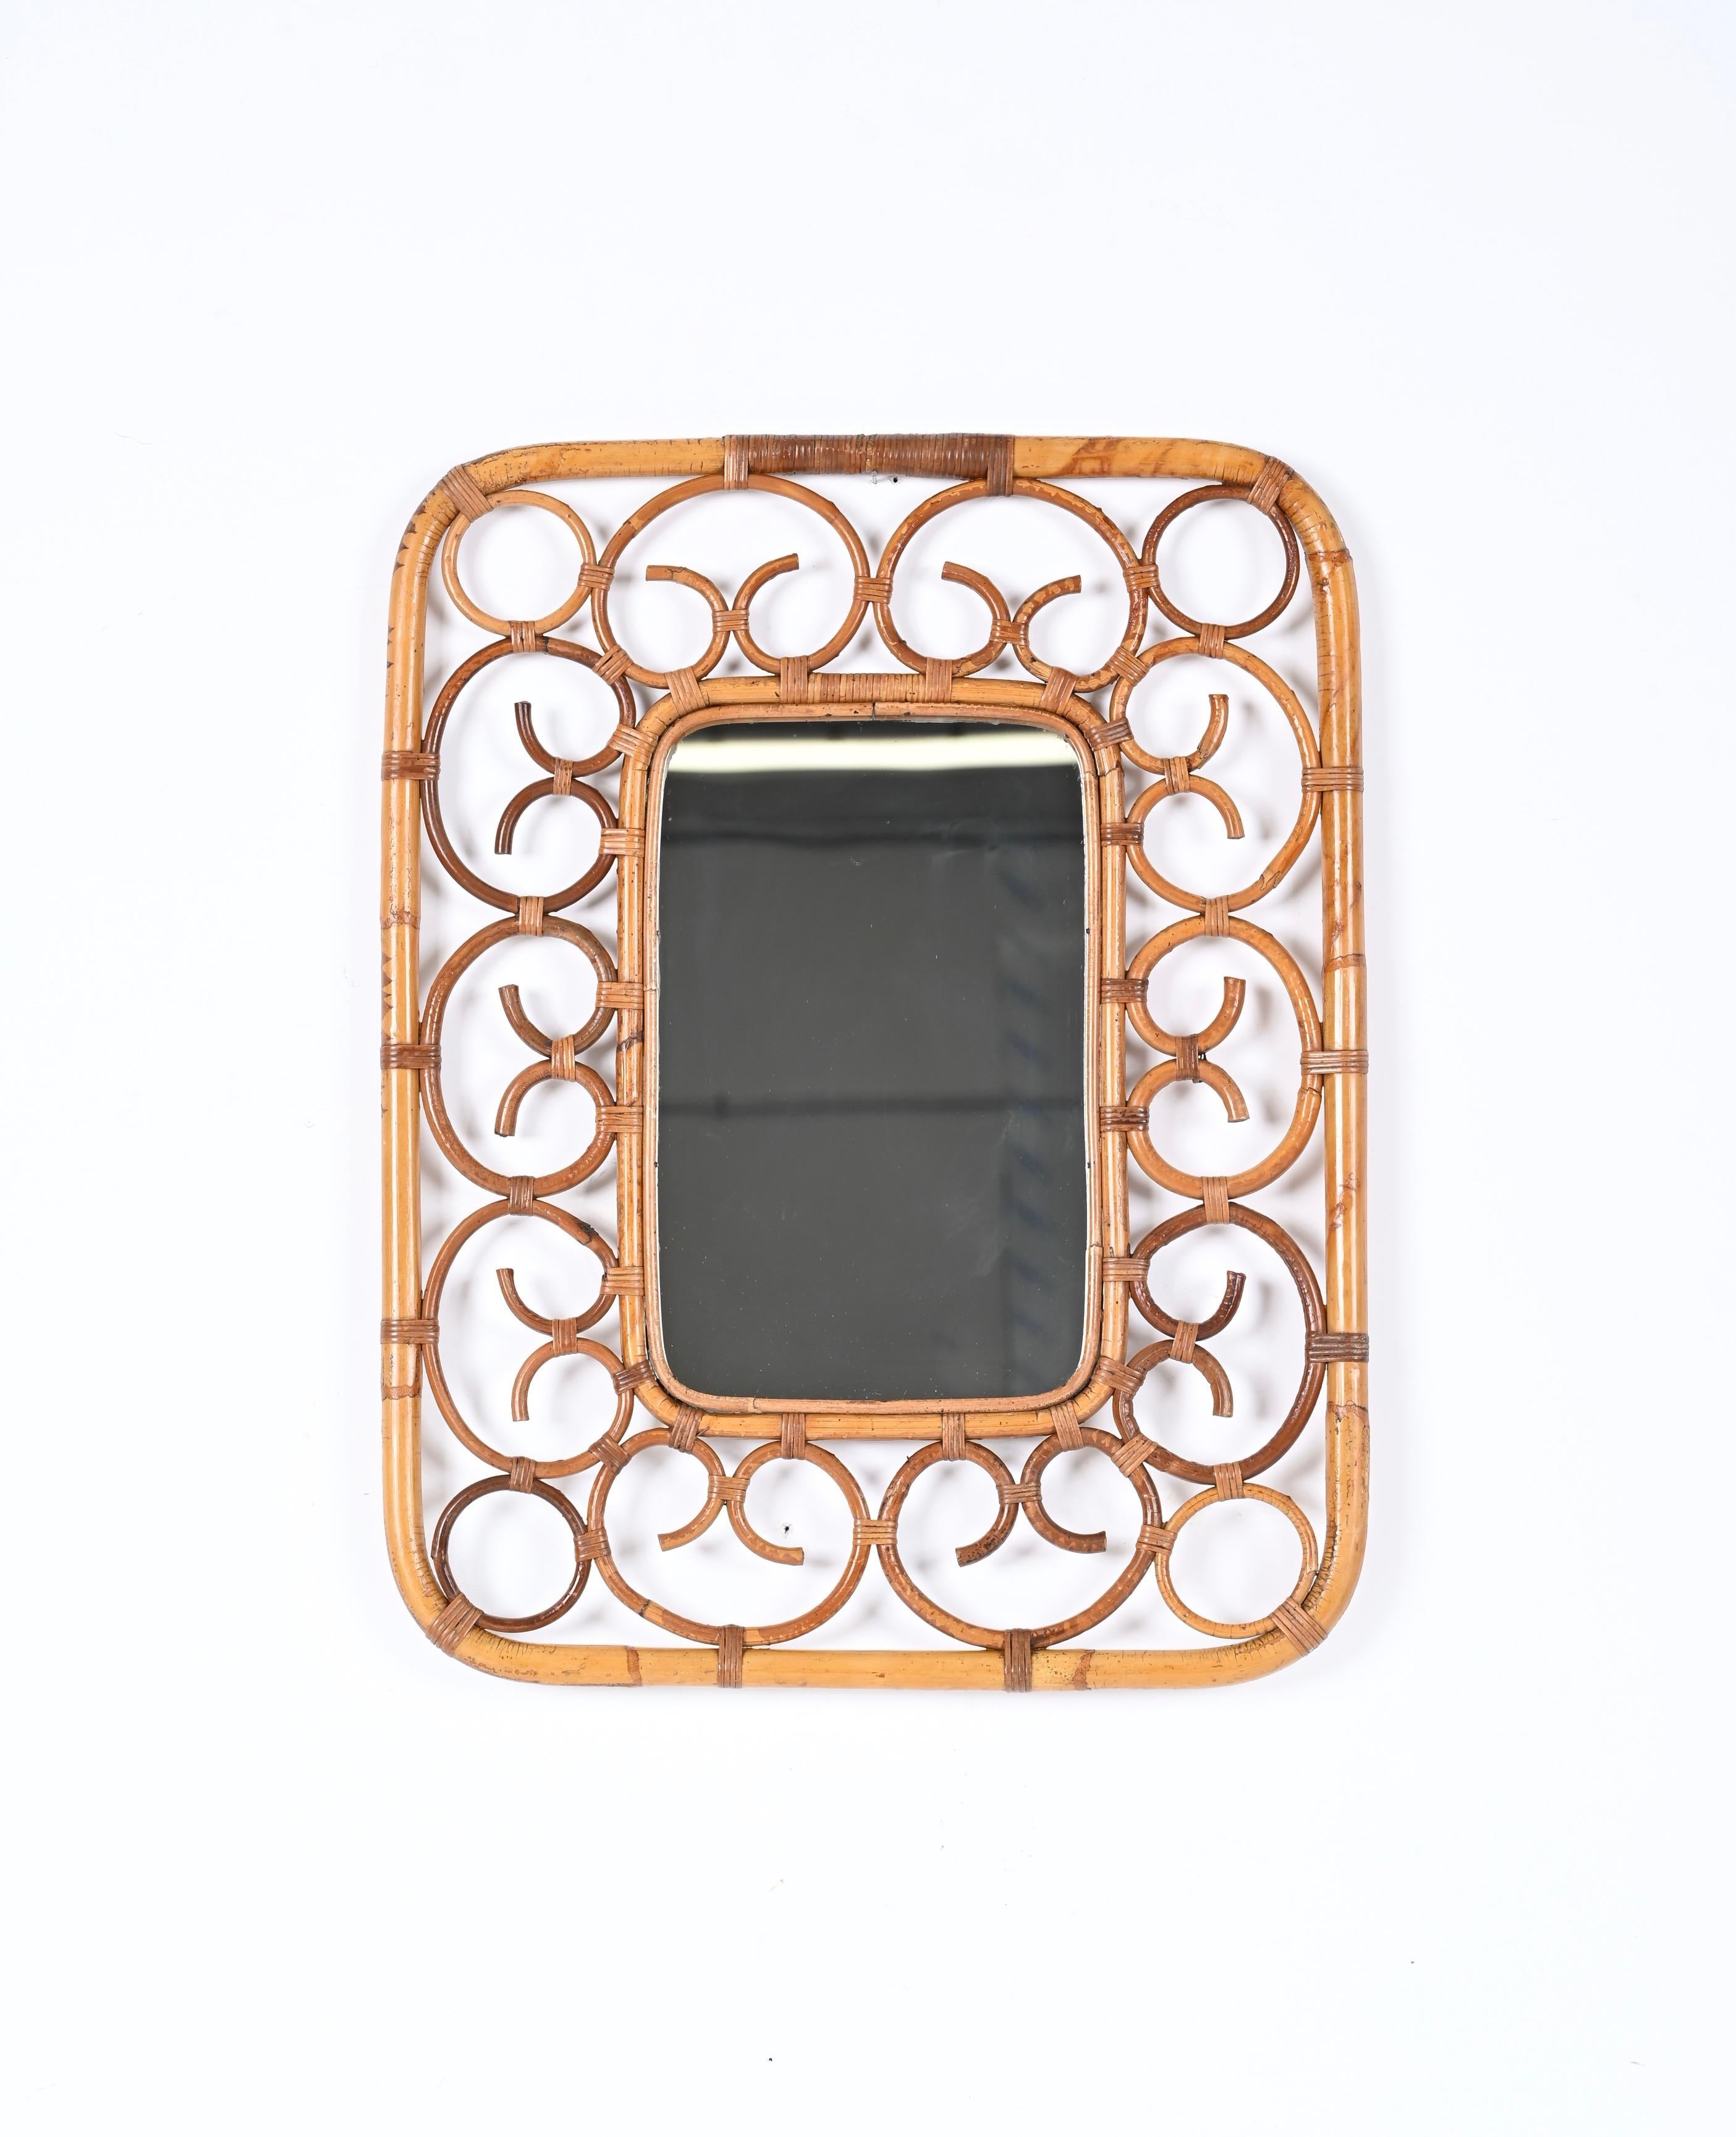 Franco Albini Bamboo and Rattan Rectangular Wall Mirror, Italy 1970s For Sale 2